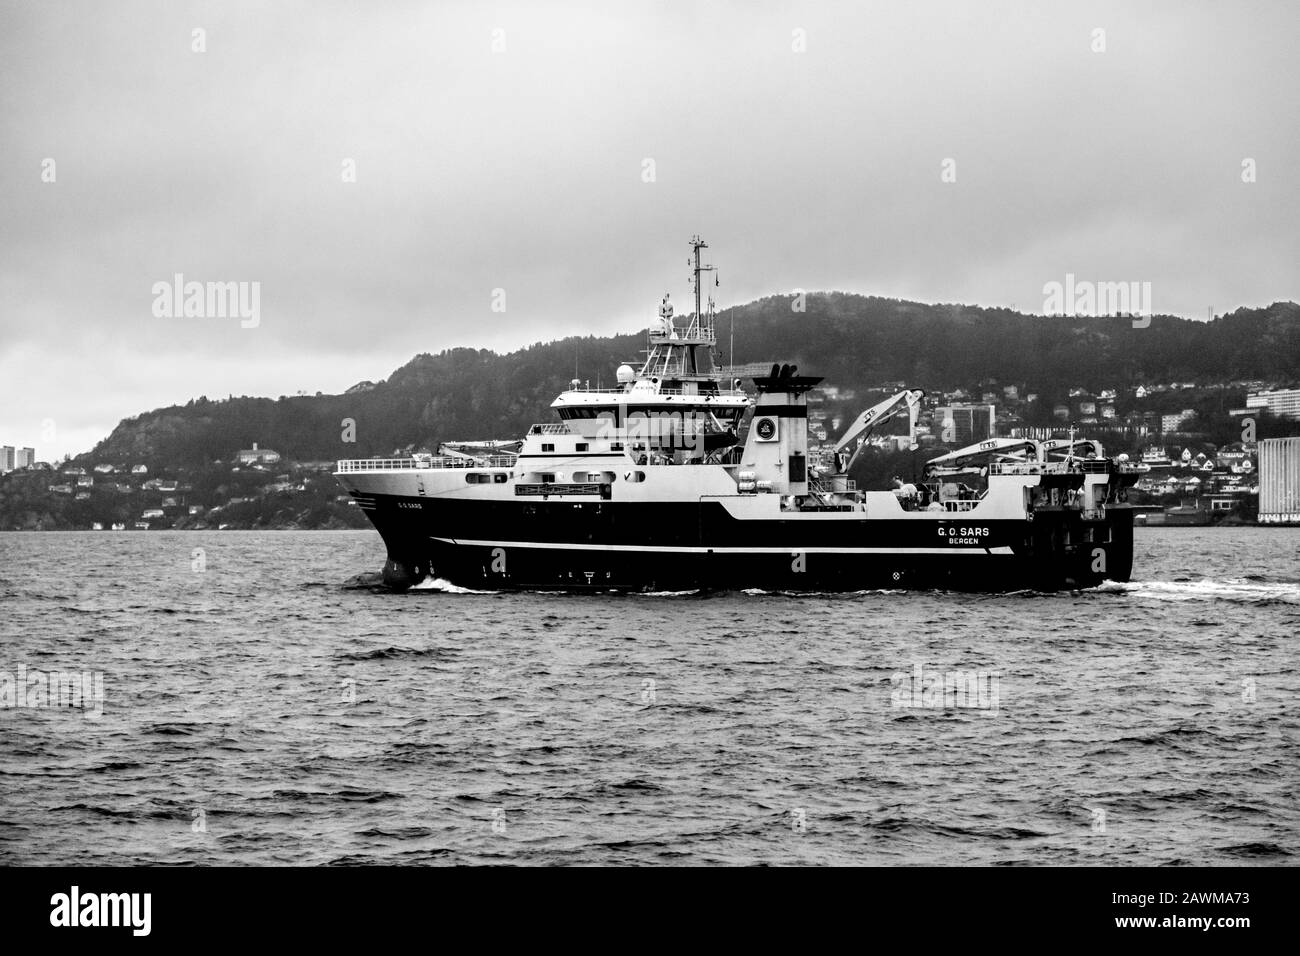 Marine research and survey vessel G.O.Sars departing from the port of Bergen, Norway. Stock Photo